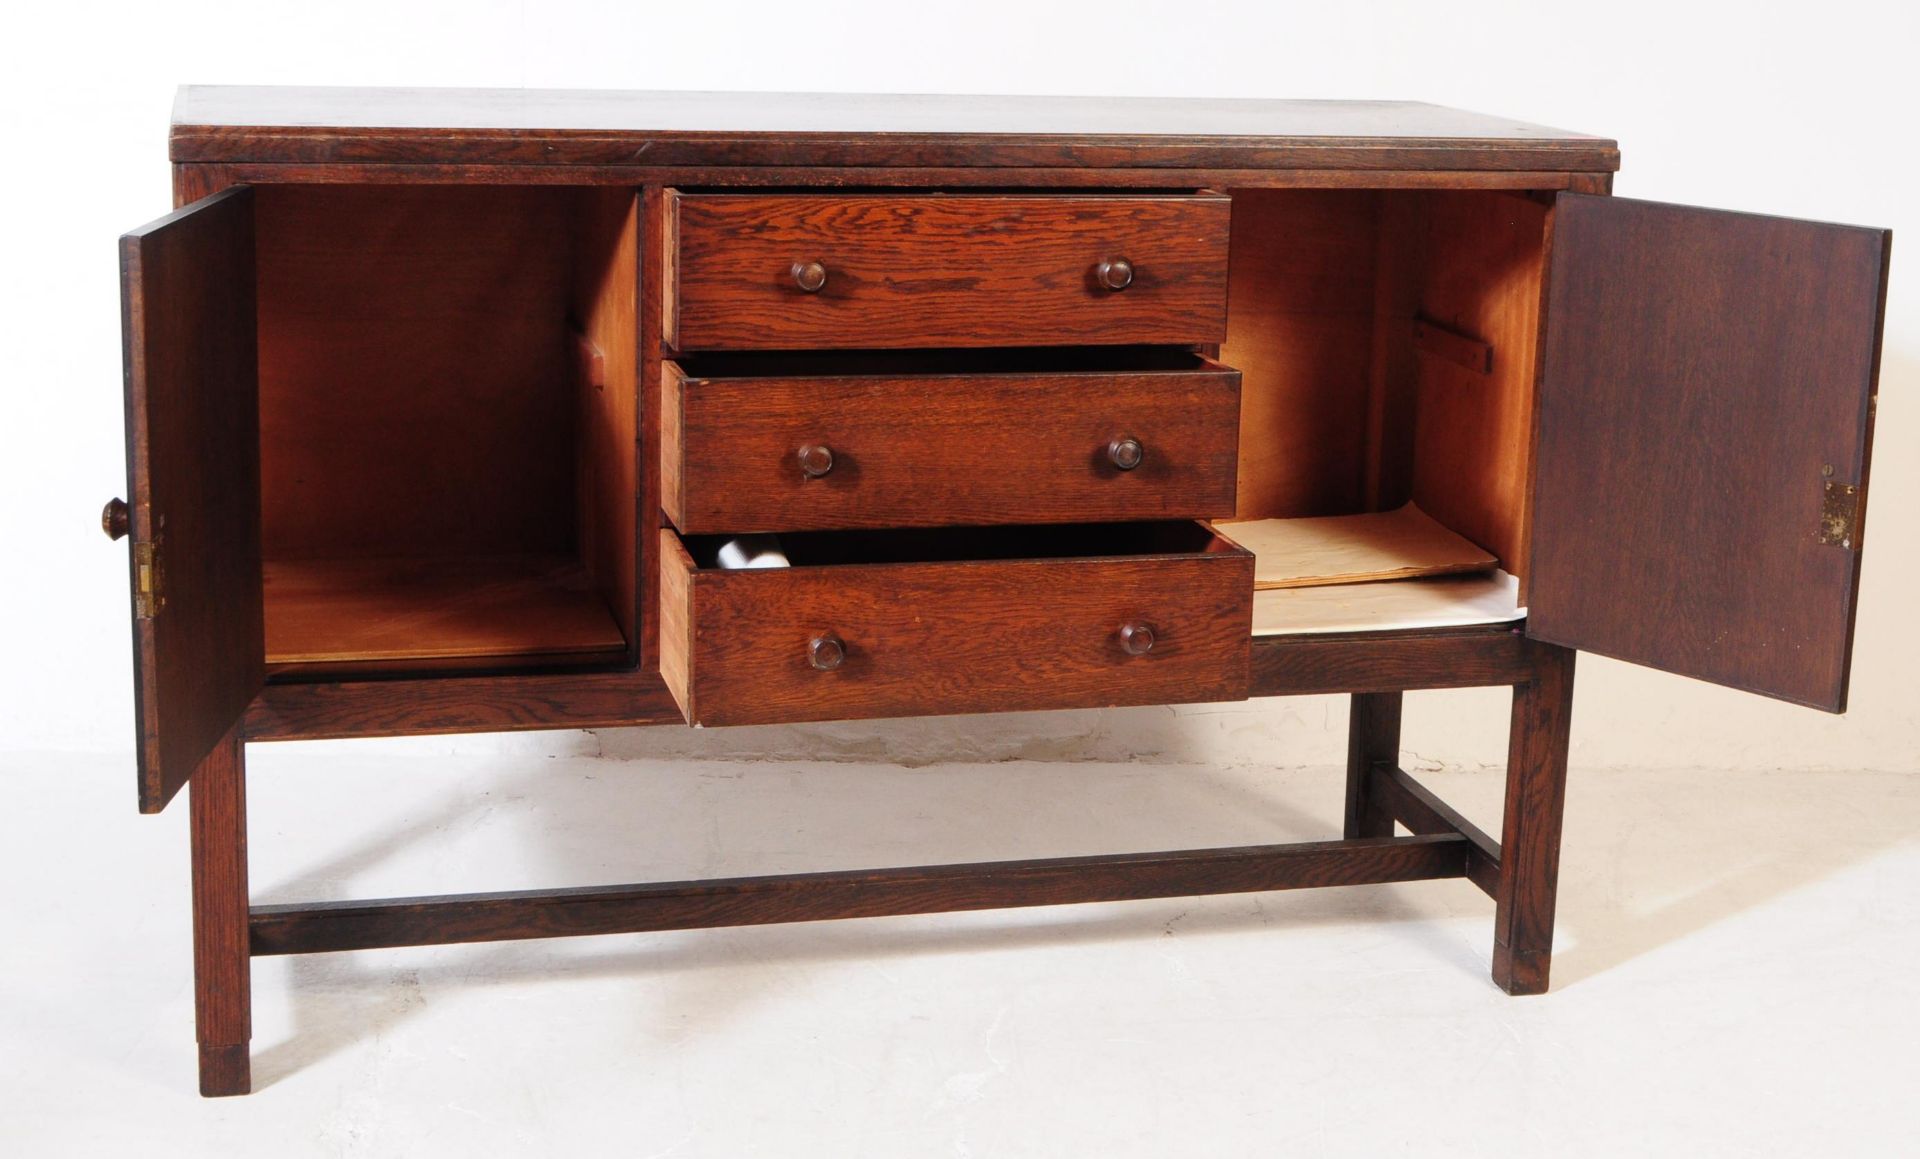 H MORRIS - COTSWOLD - MID 20TH CENTURY OAK SIDEBOARD - Image 3 of 8